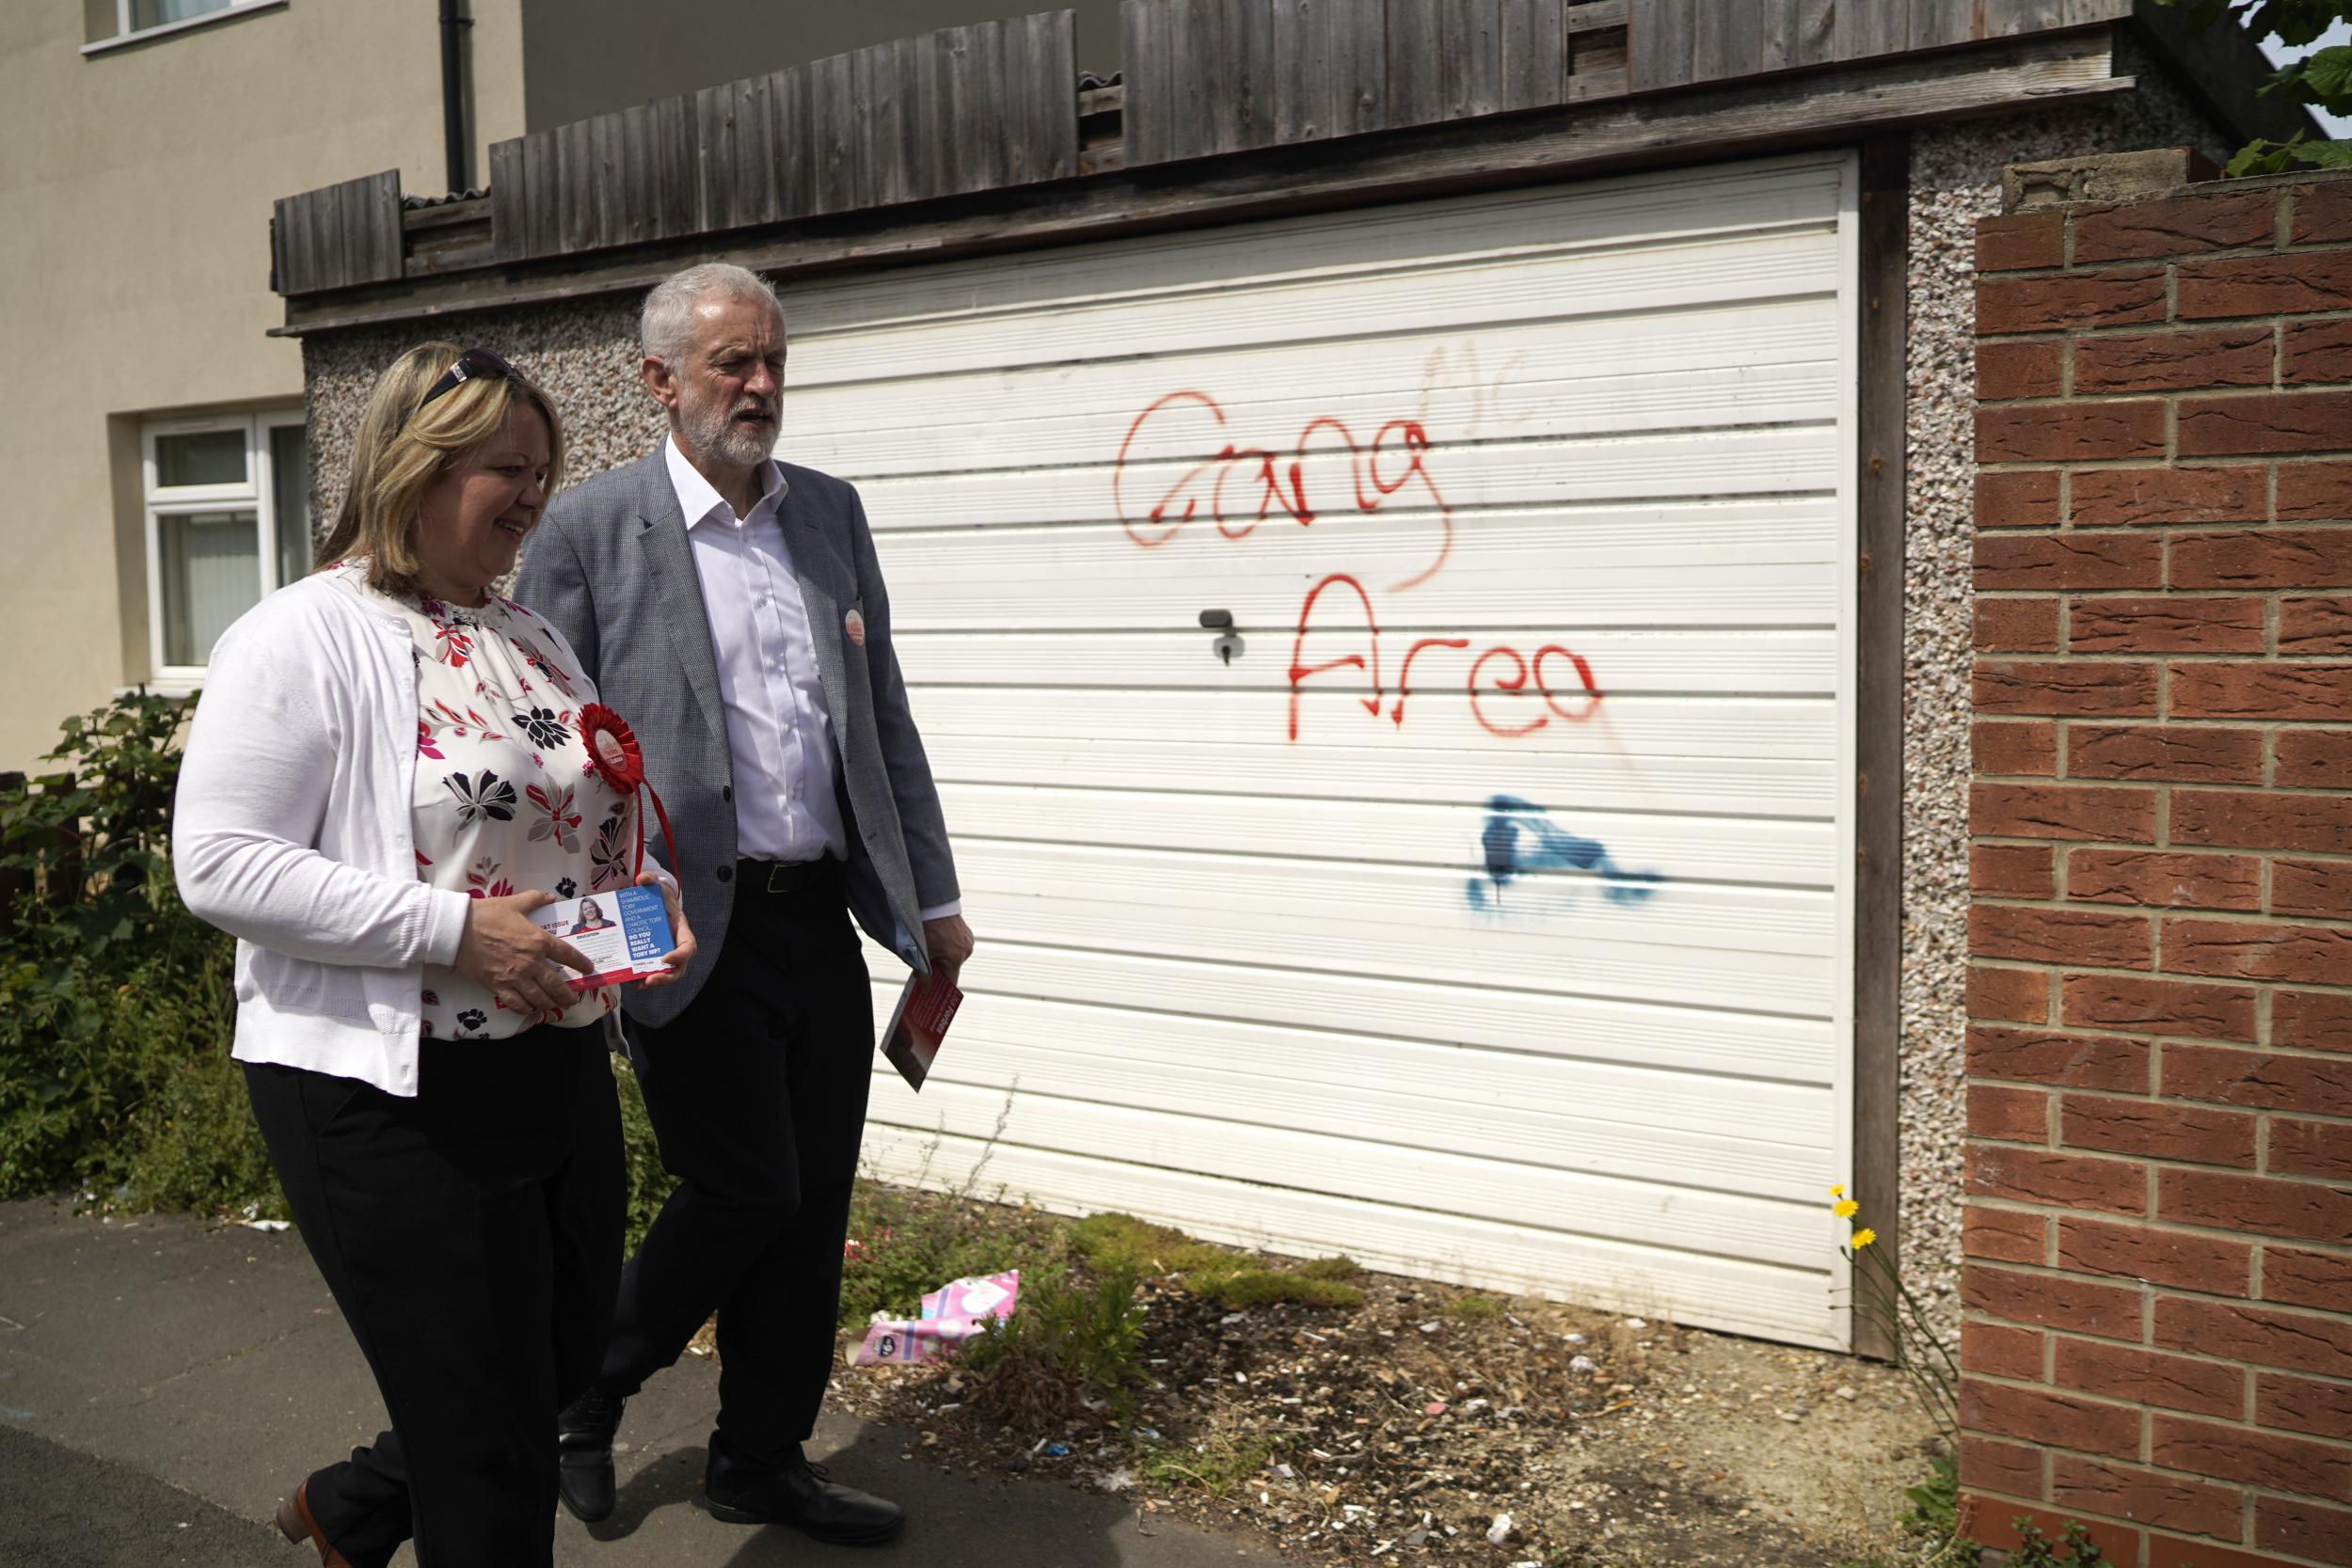 Forbes and Corbyn take part in a walkabout in the run up to the Peterborough by-election